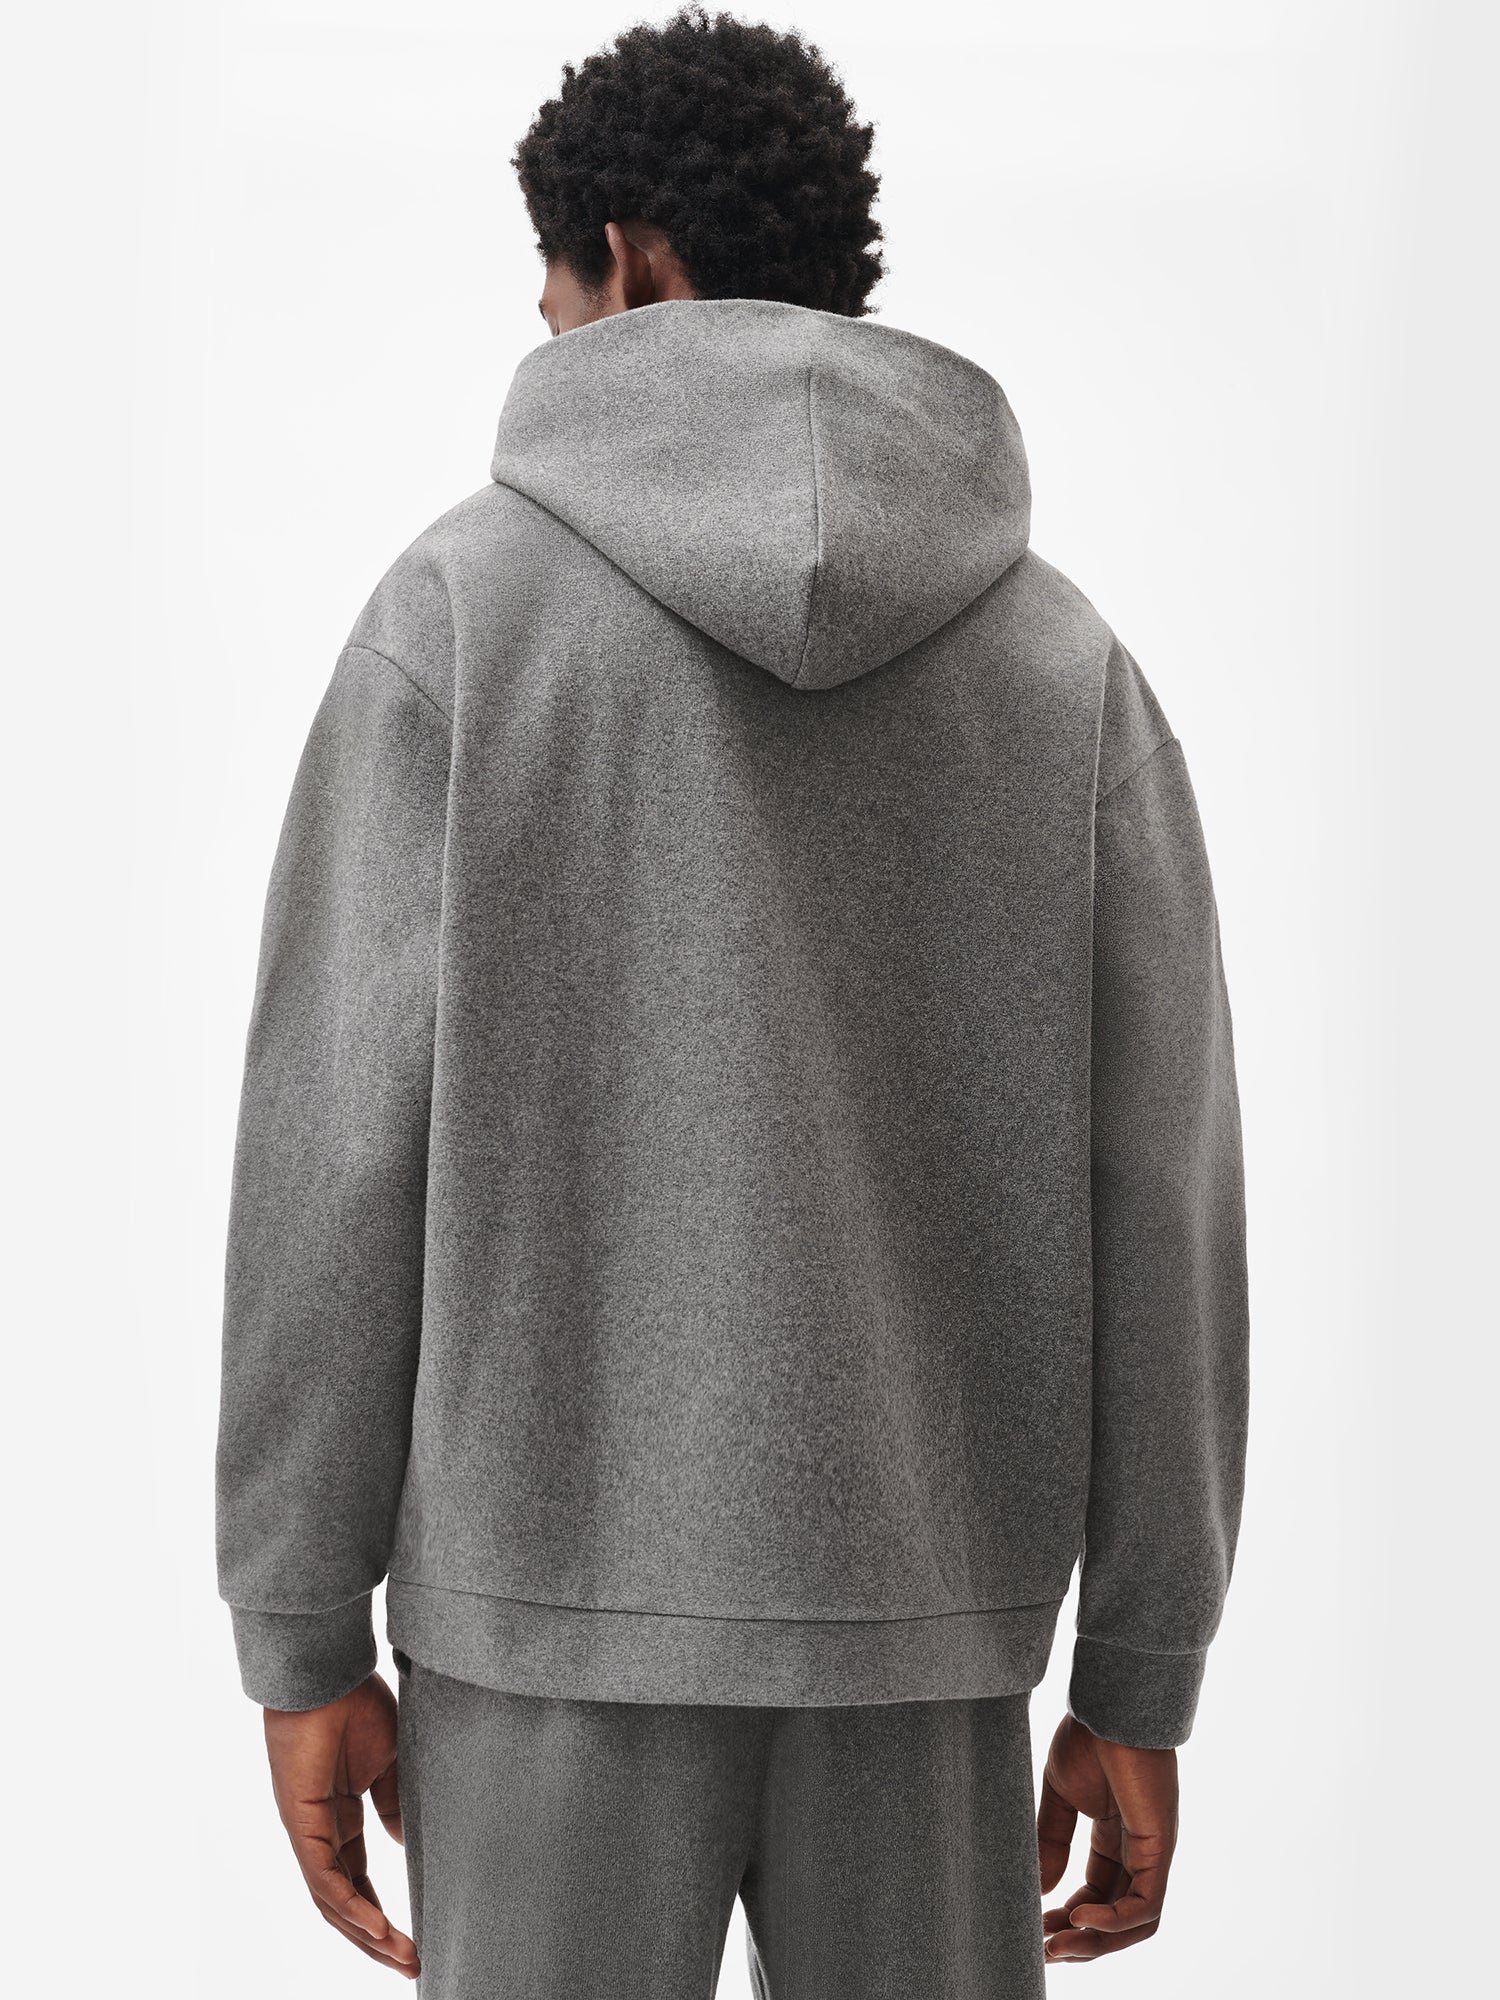 Wool-Jersey-Hoodie-With-Pocket-Volcanic-Grey-Male-3